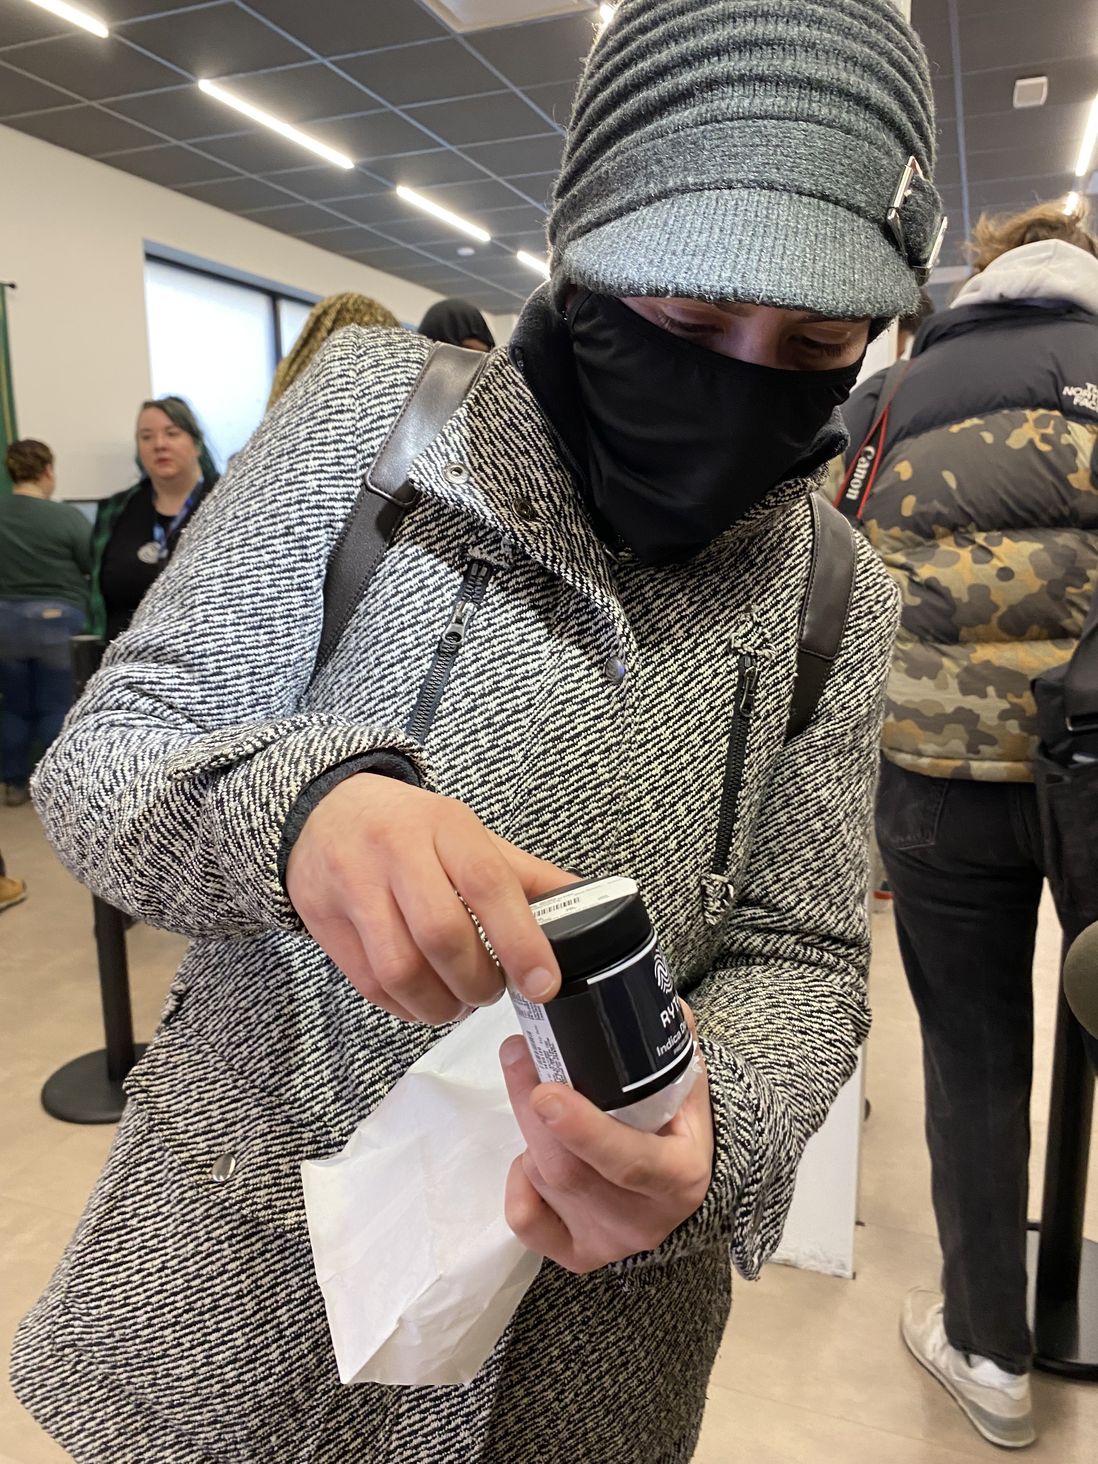 Melissa Correa, 42, the first person in line when the RISE dispensary in Bloomfield opened at 6 a.m., showing off her purchase, April 21st, 2022.